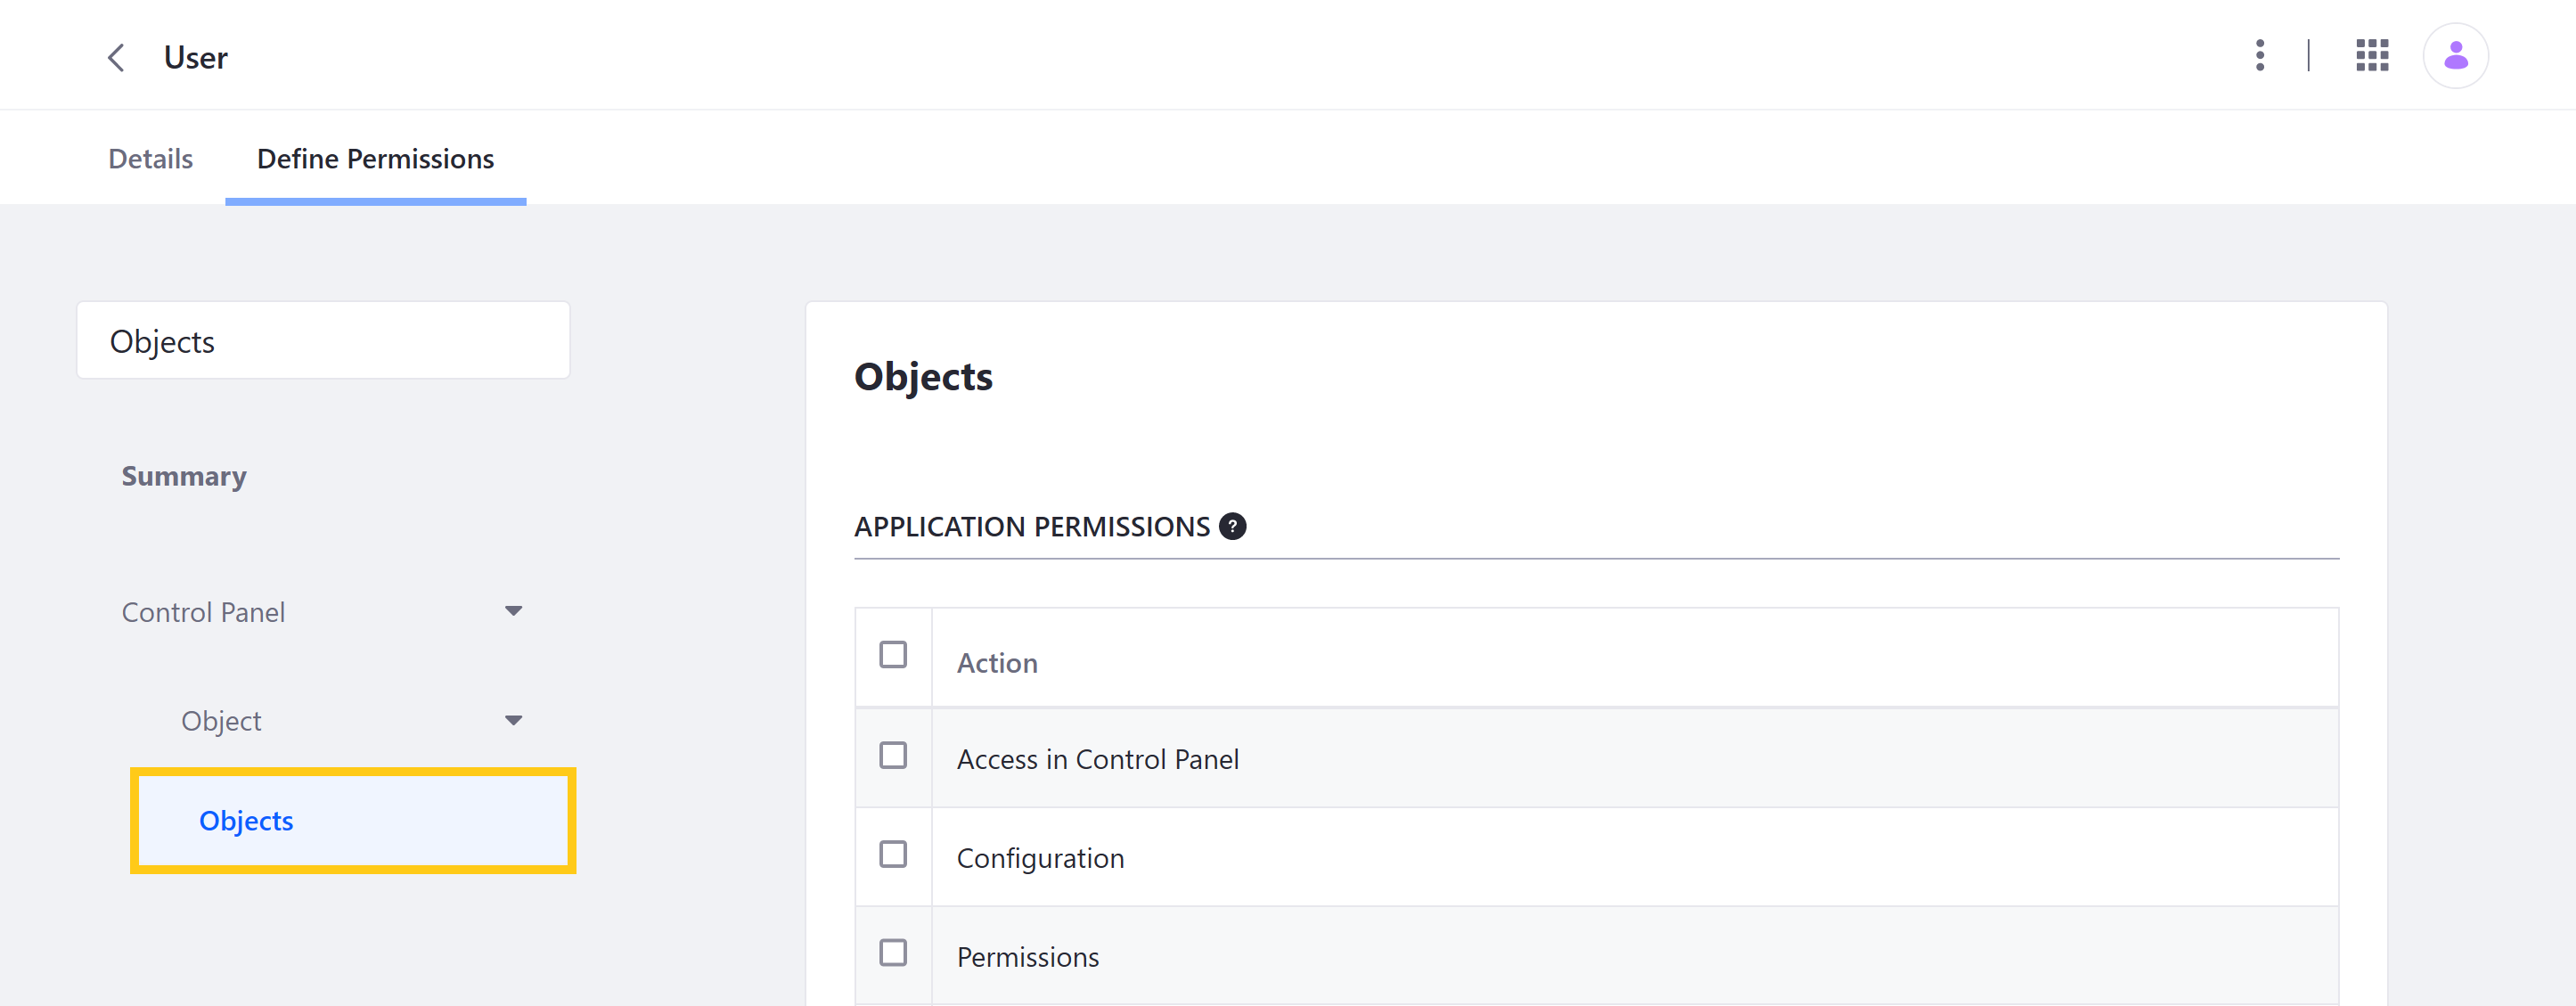 Assign Objects permissions when defining role permissions.